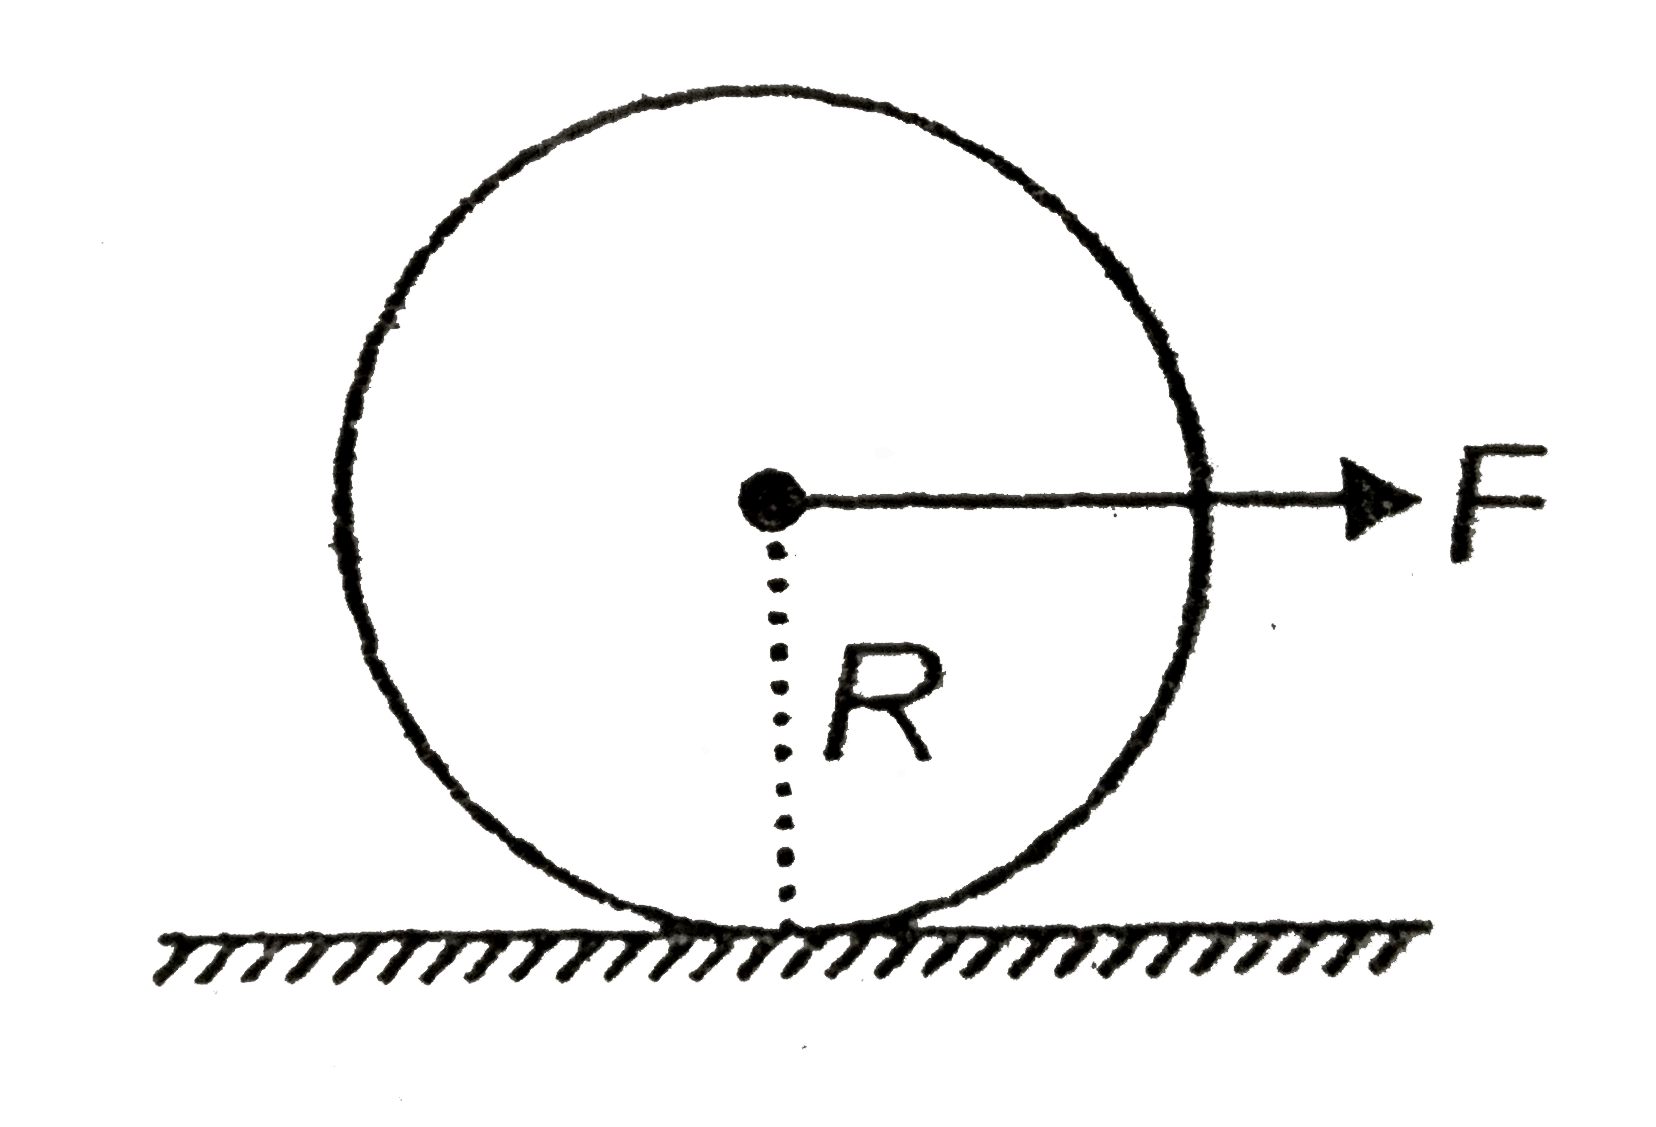 A force F is applied at center of a uniform round object of mass m radius R and moment of inertia about its centre of mass I(cm). Find (if (I(cm))/(mR^(2))=k).   (a) Acceleration of center of the round object if it rolls without slipping.   (b) Minimum coefficient of fricition required so that the round object rolls without slipping.